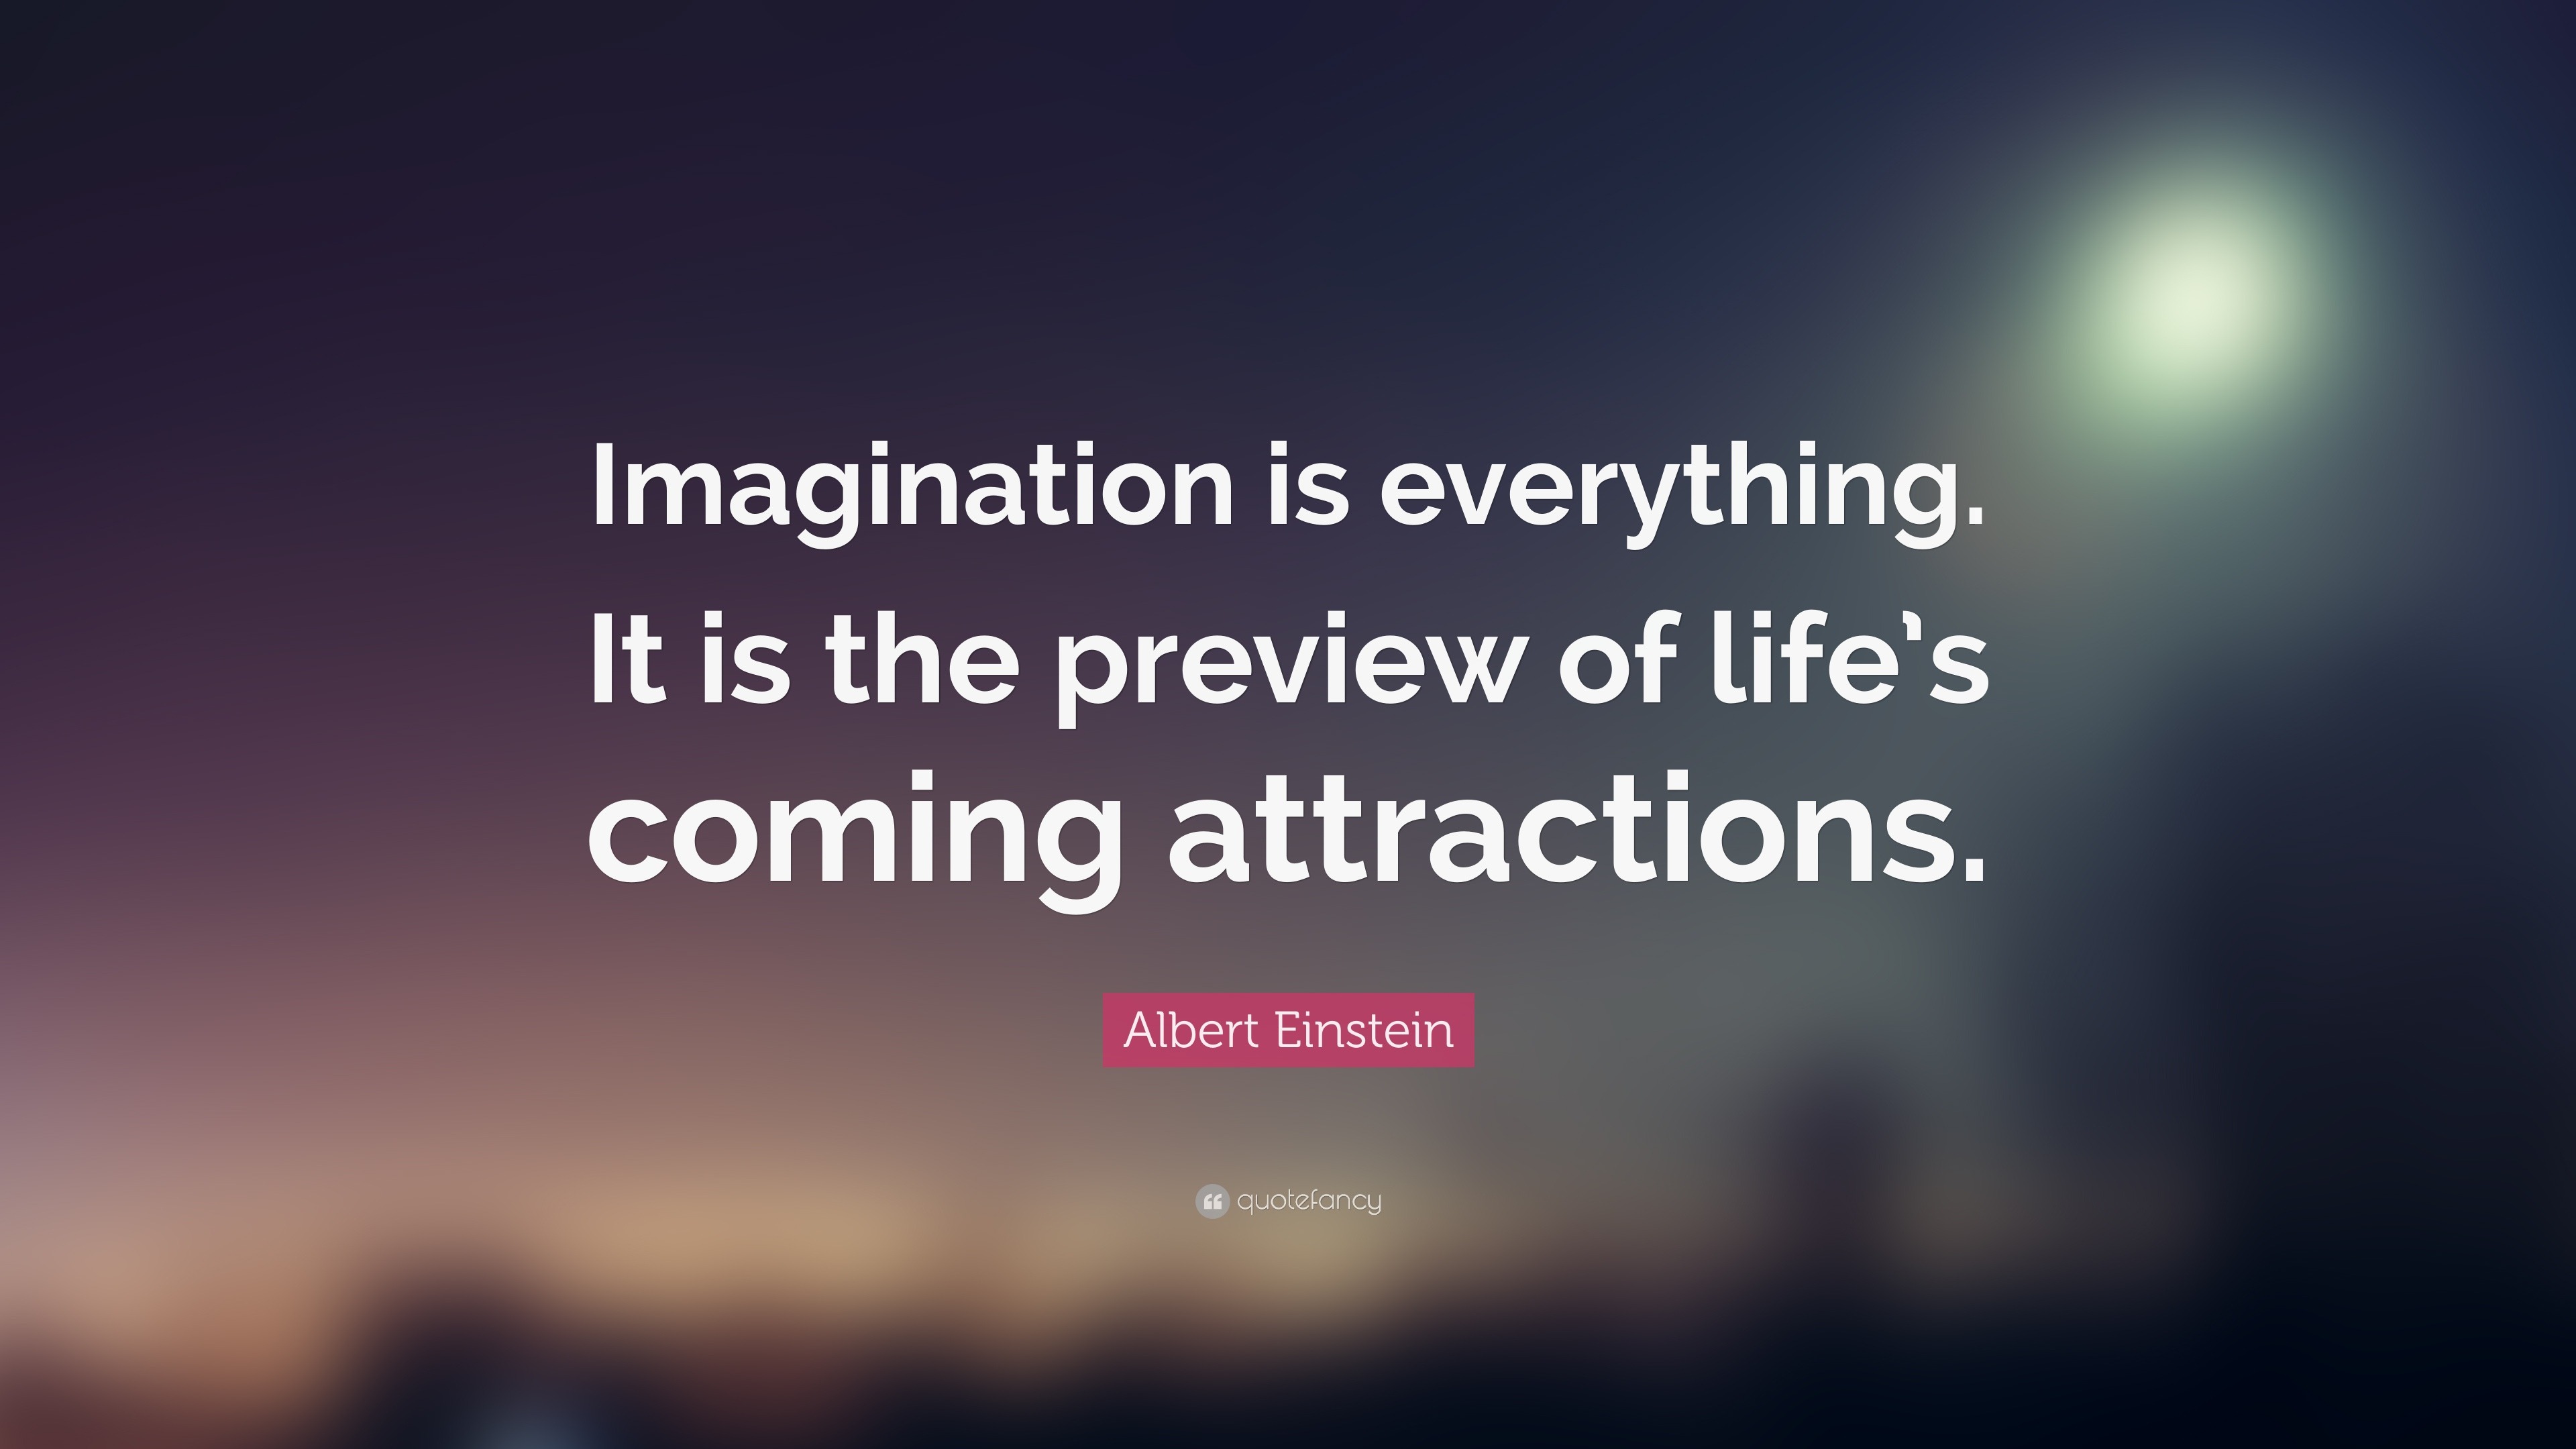 Albert Einstein Quote: “Imagination is everything. It is the preview of